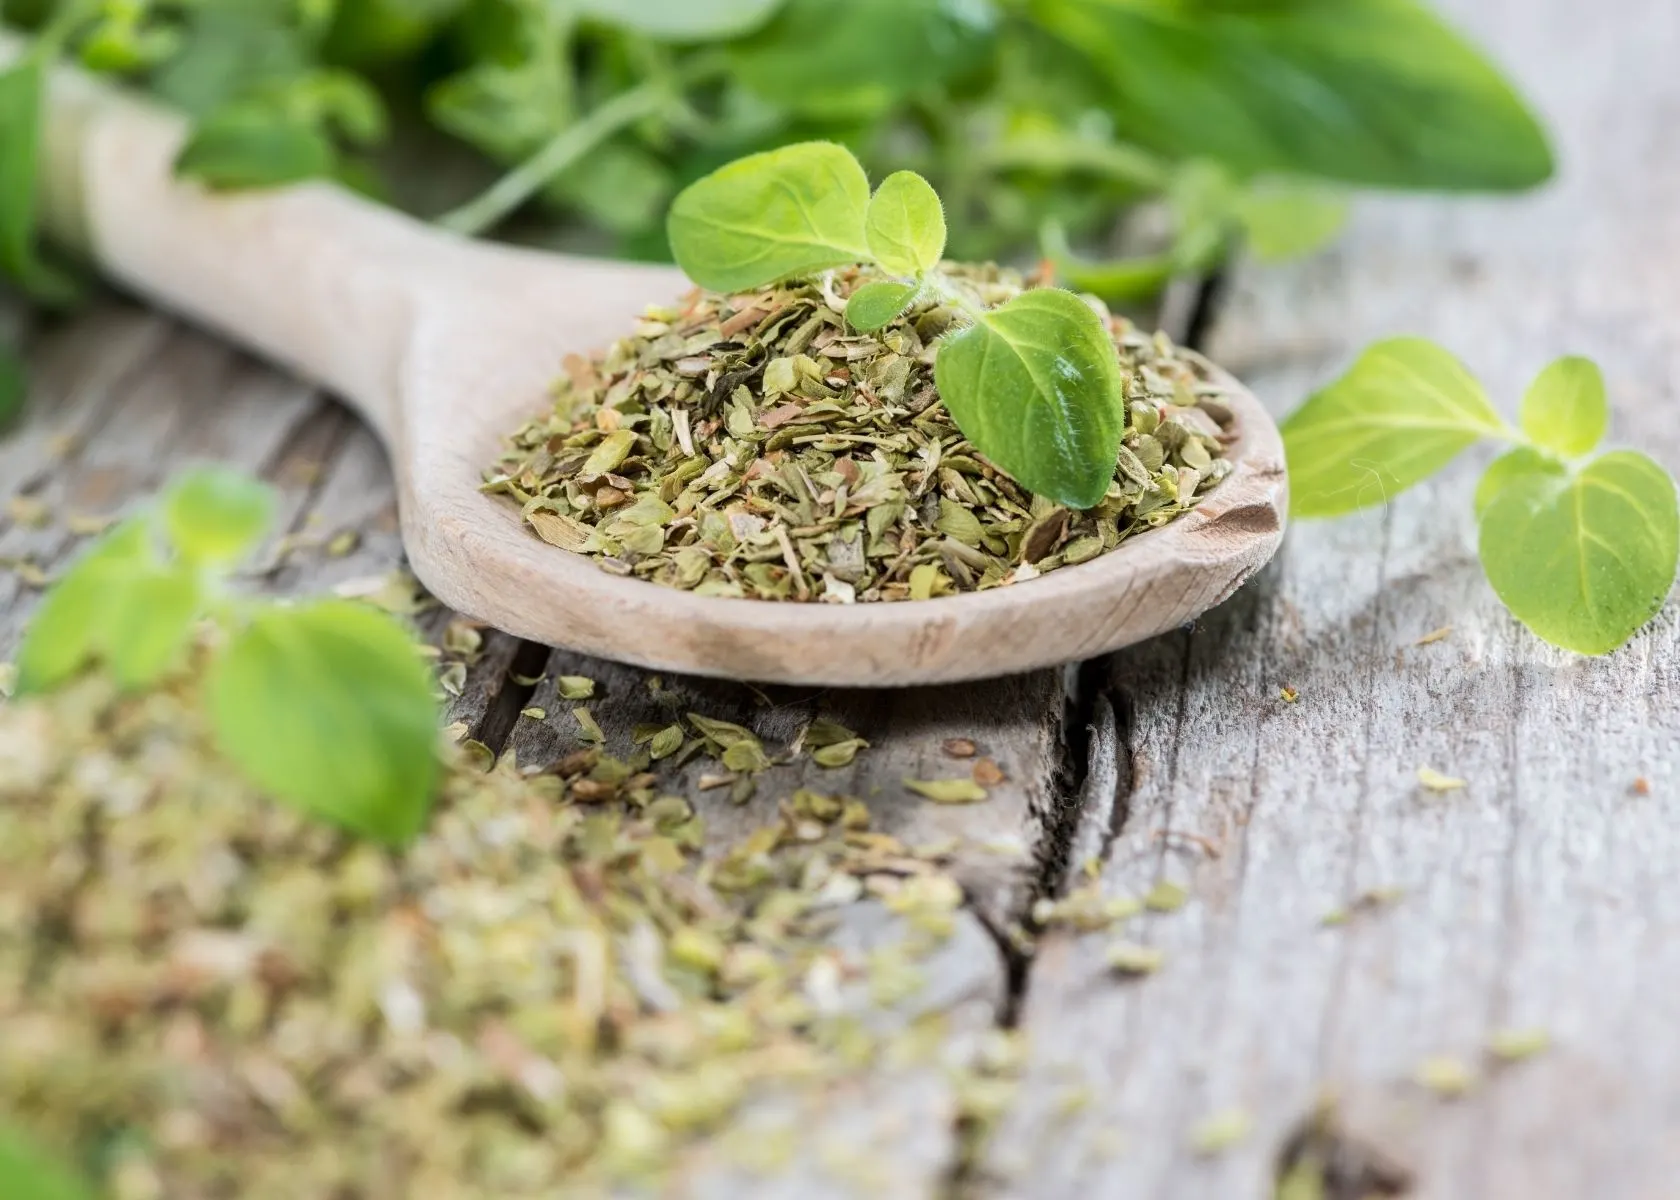 Dried oregano on a large wooden spoon surrounded by fresh oregano leaves.